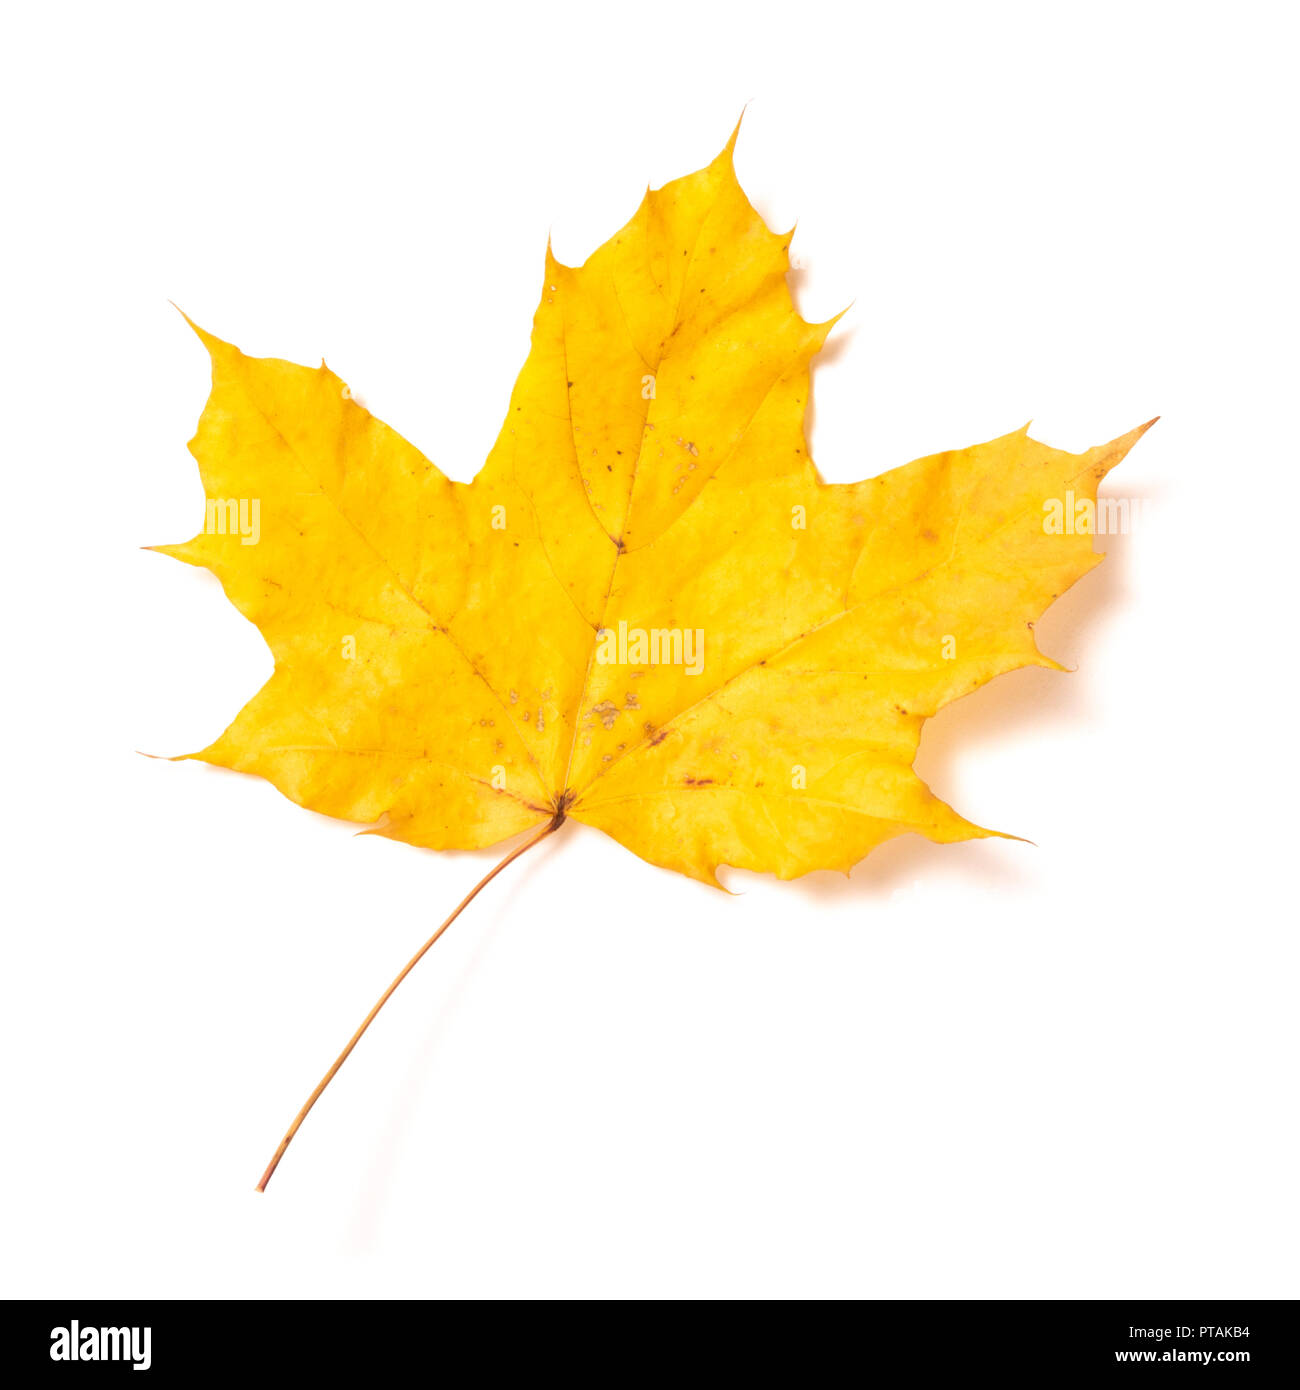 One autumn yellow maple leaf isolated on a white background Stock Photo